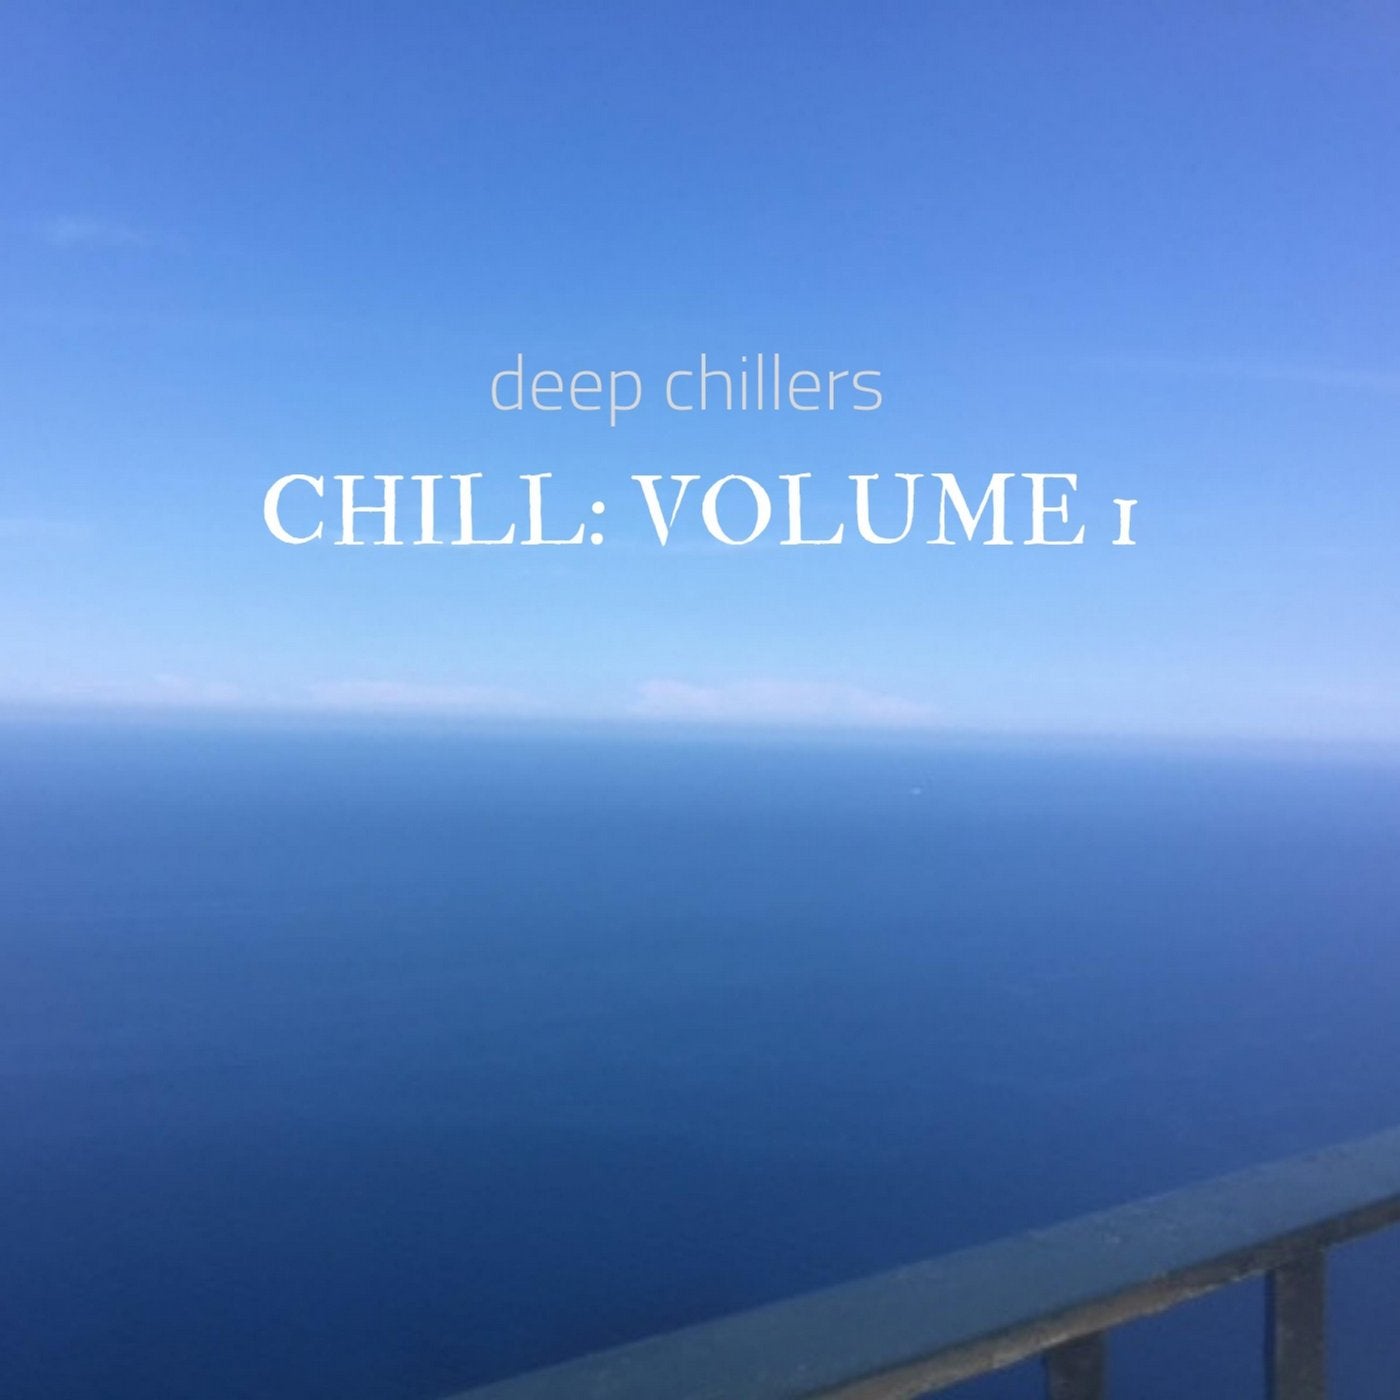 7 chill. Chill мм2. Чилл ви. Typical Chill Song. Deep Chillers - simp.